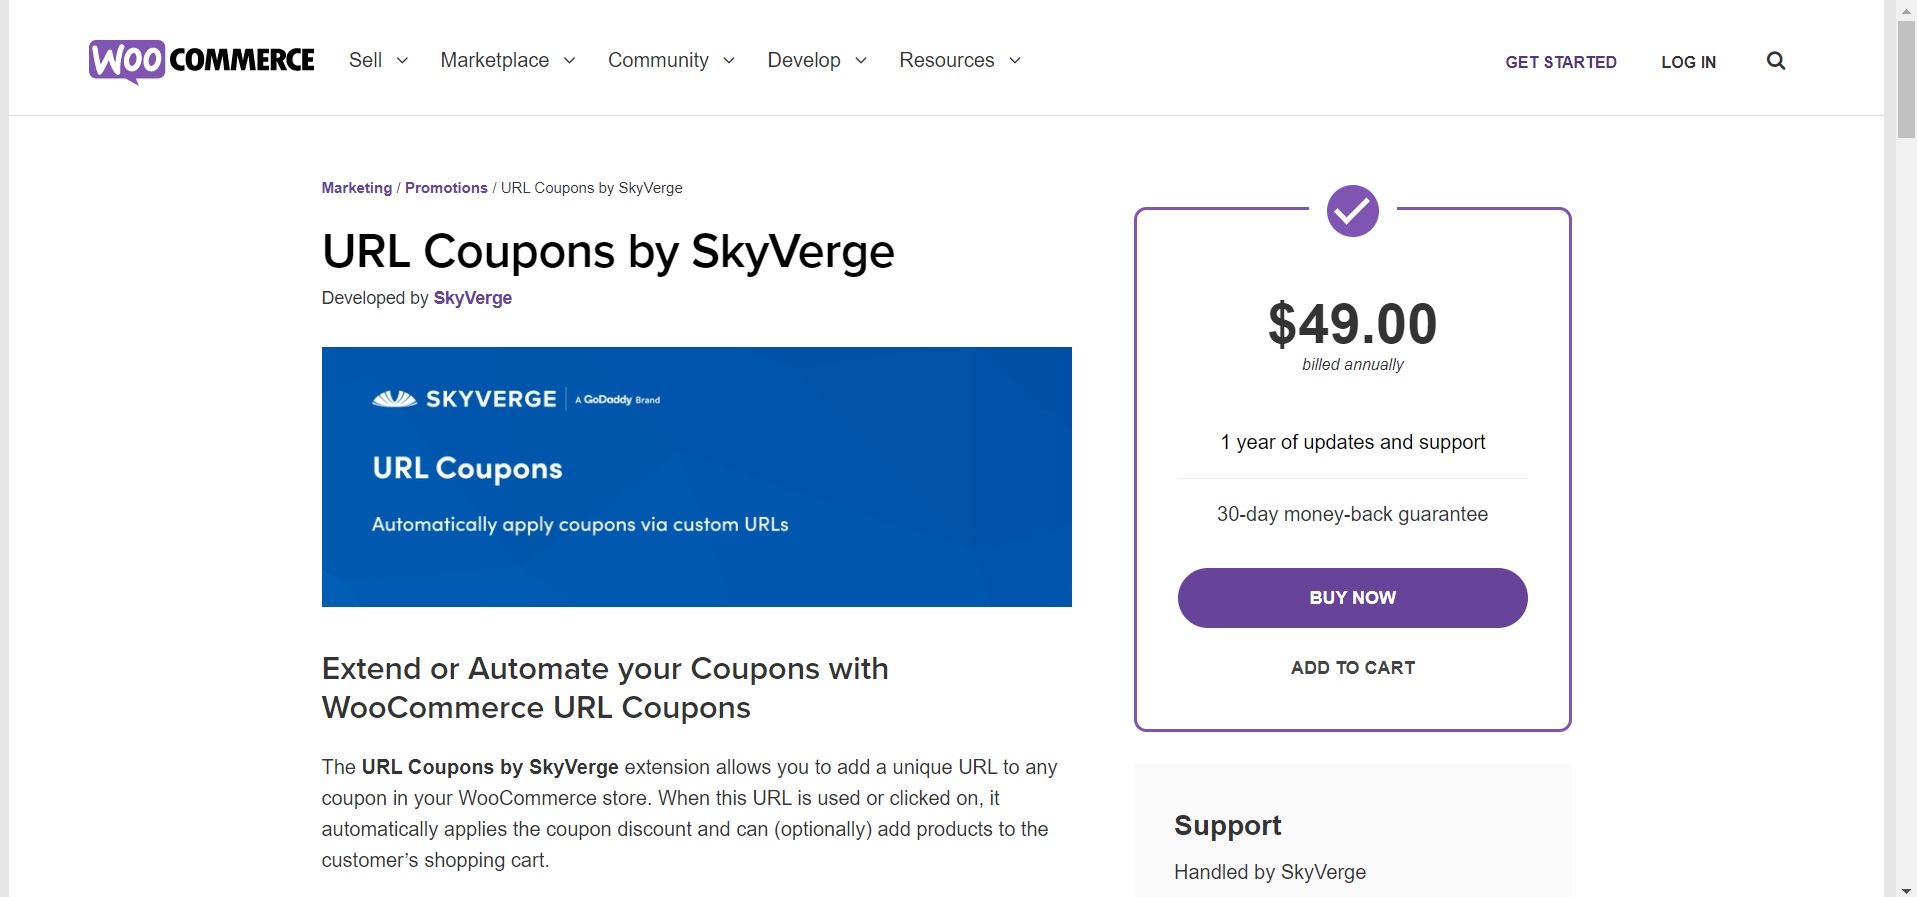 URL Coupons by SkyVerge